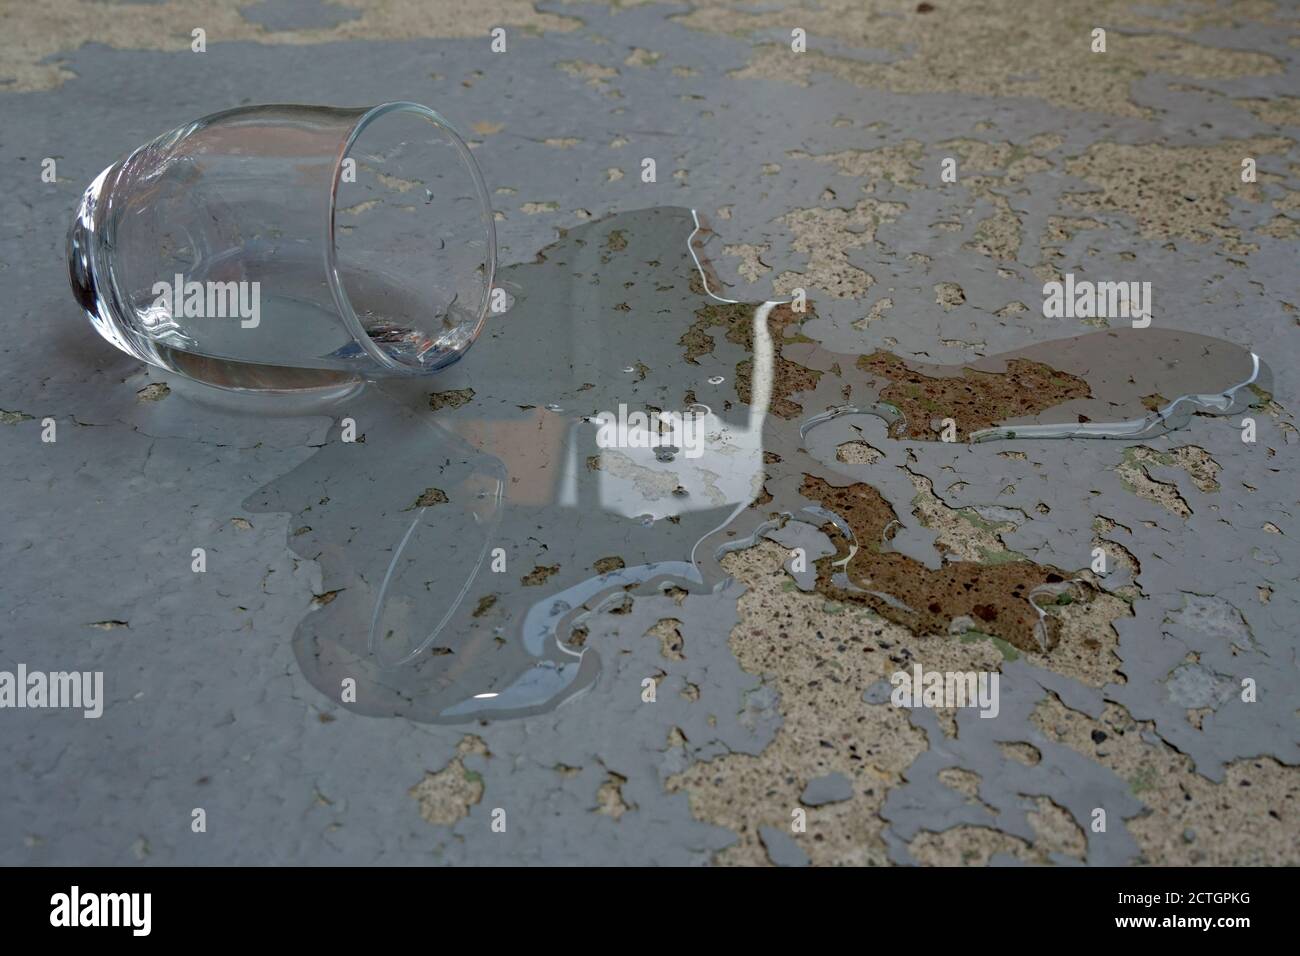 Glass of water overturned or tipped over on the concrete plate with peeling off old paint. The spilled liquid forms irregular puddle around the glass. Stock Photo